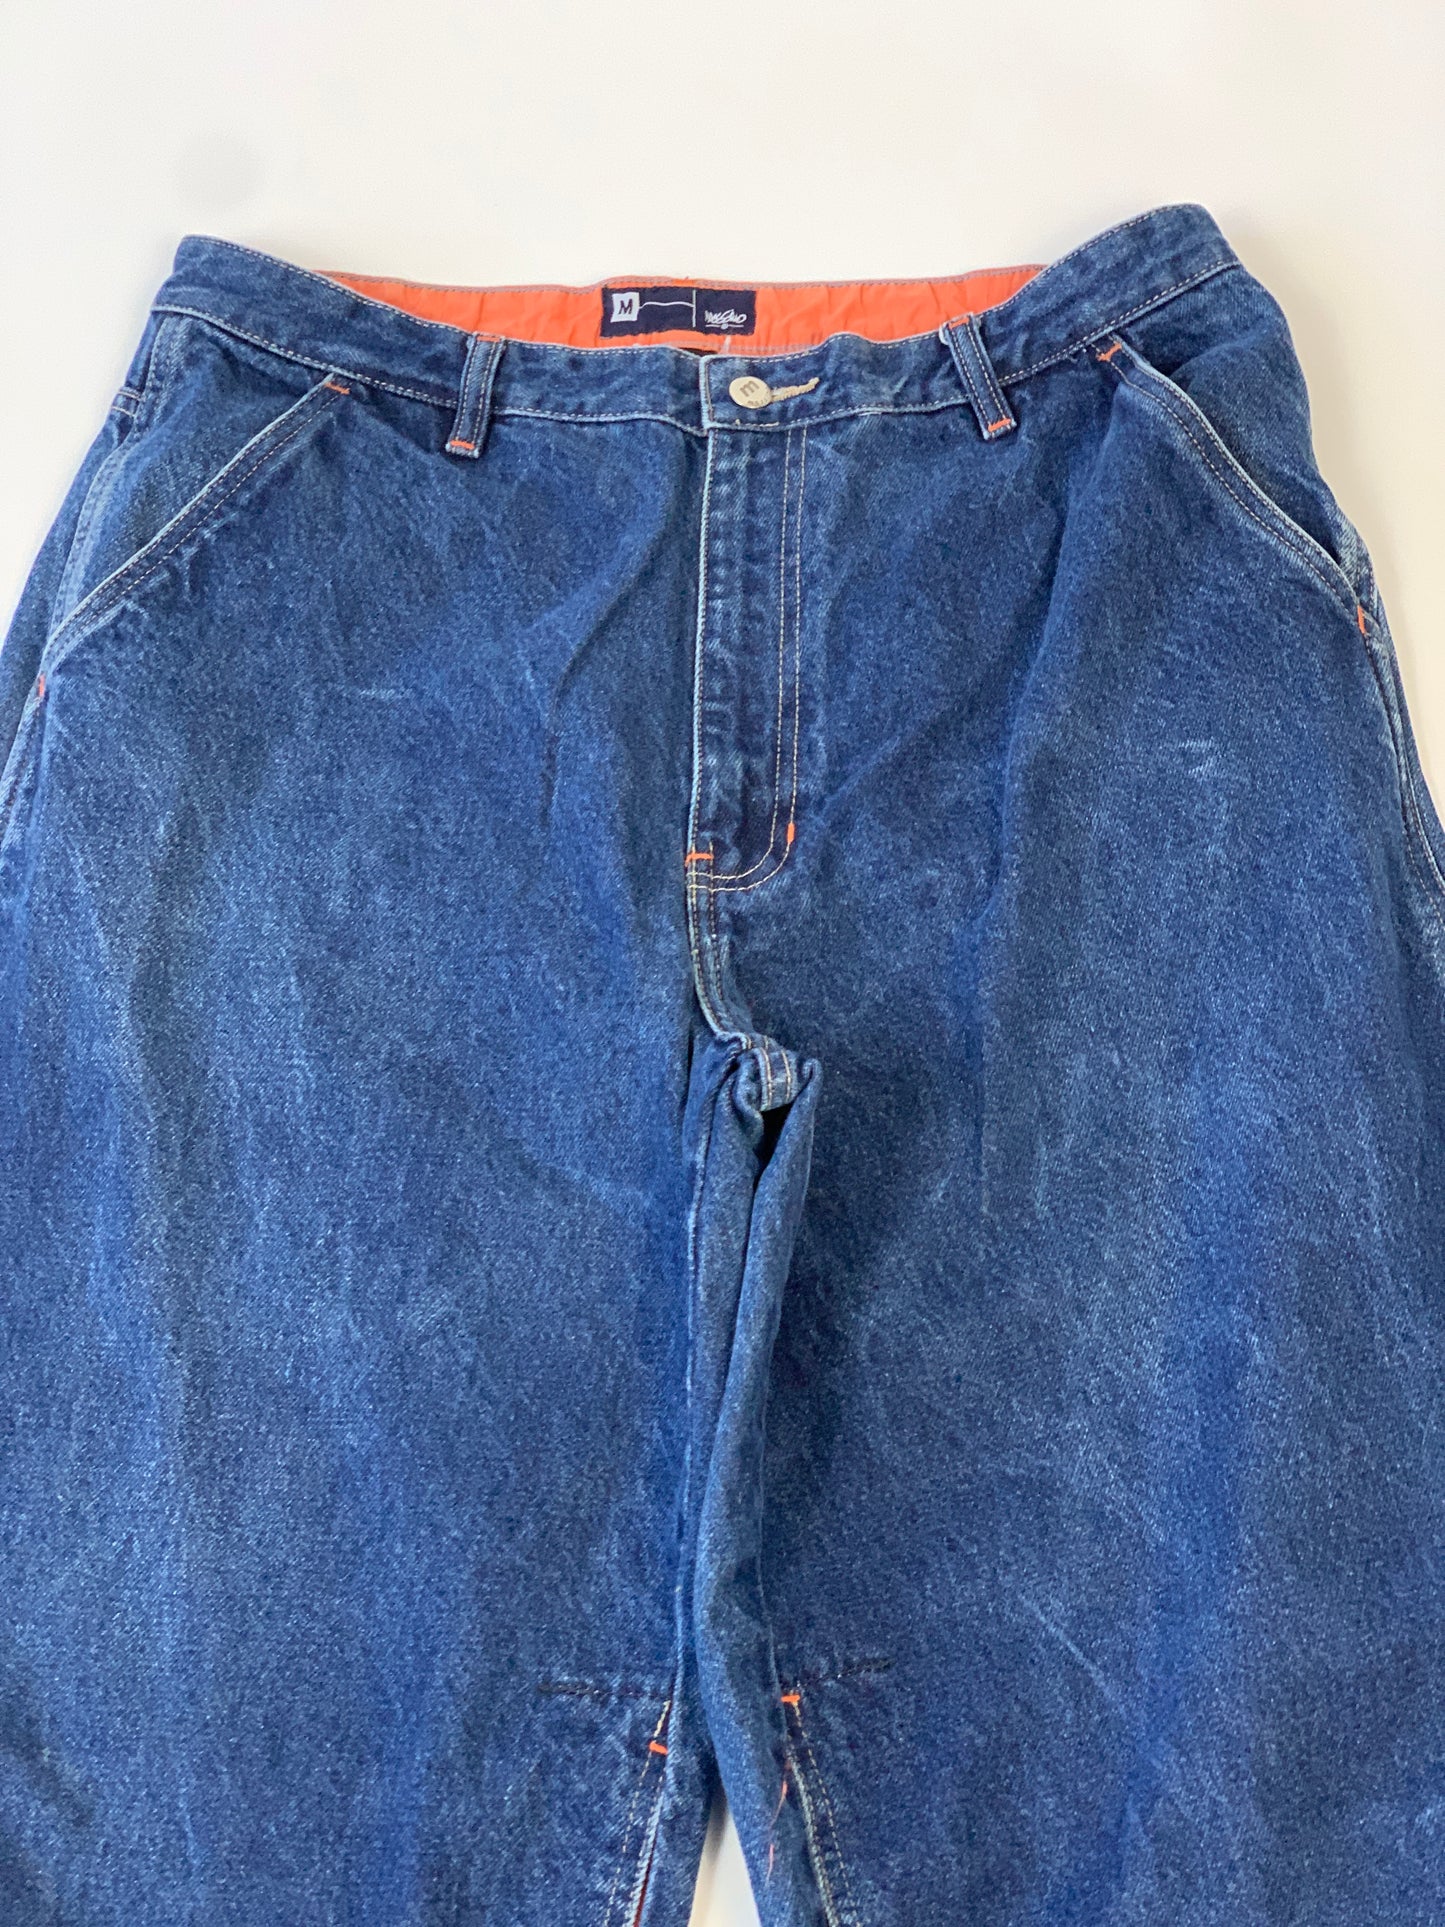 Shorts Baggy Mossimo Vintage - M